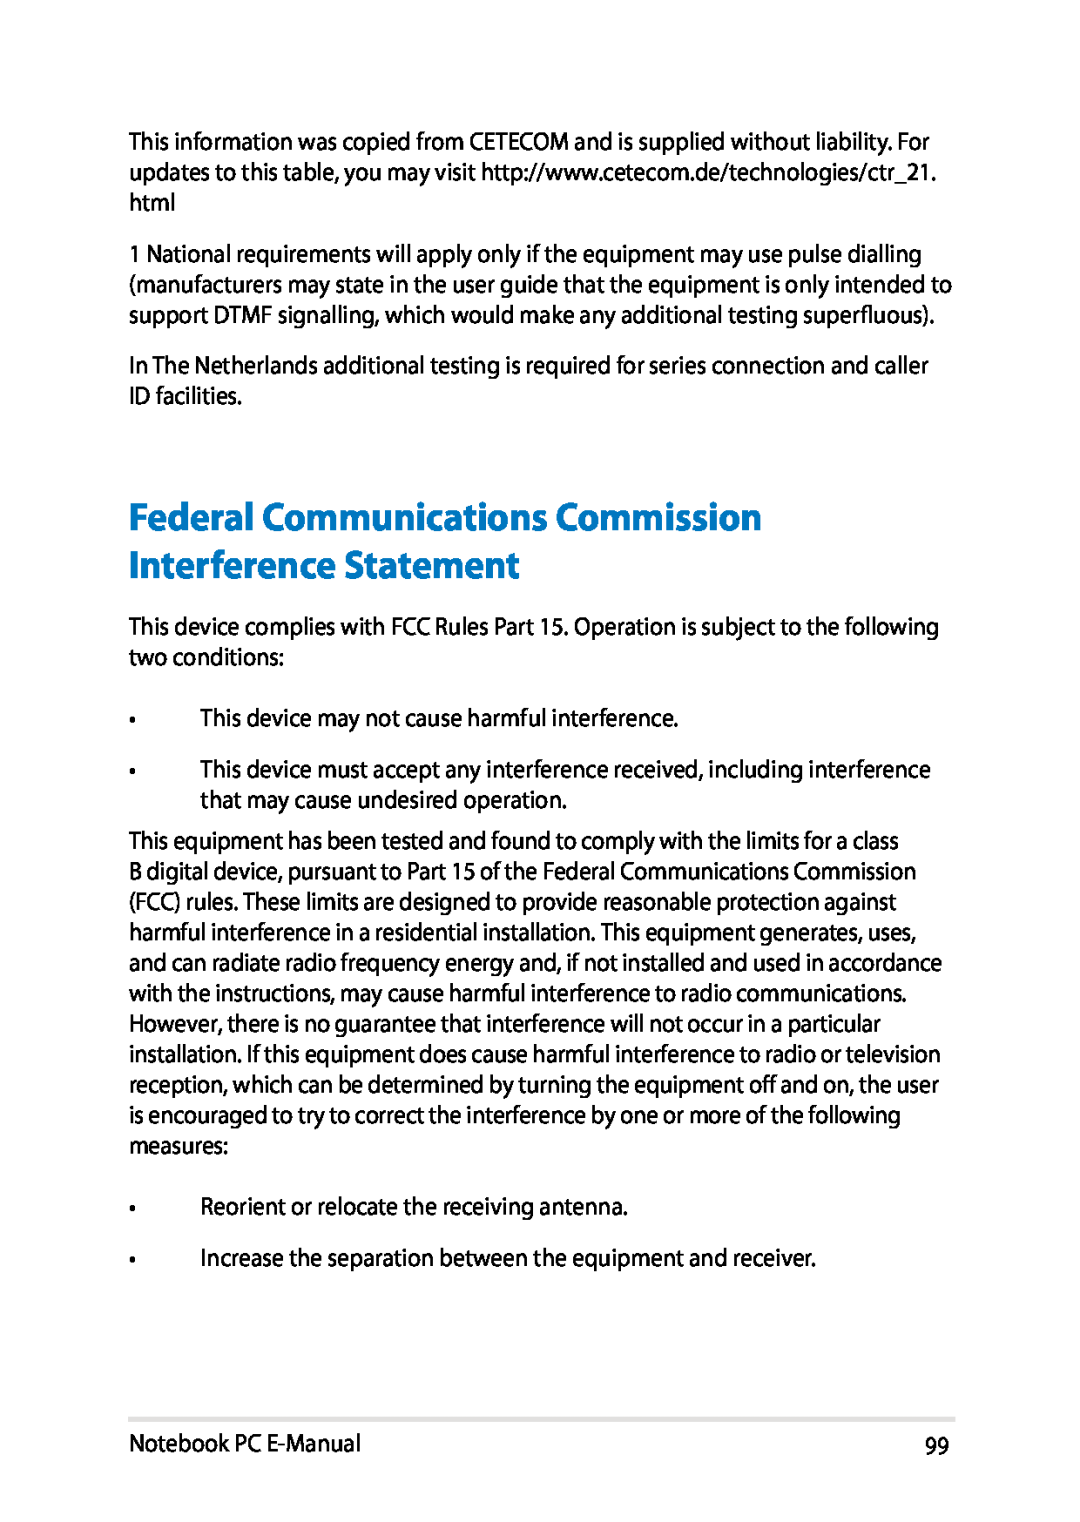 Asus E8438 manual Federal Communications Commission Interference Statement, This device may not cause harmful interference 